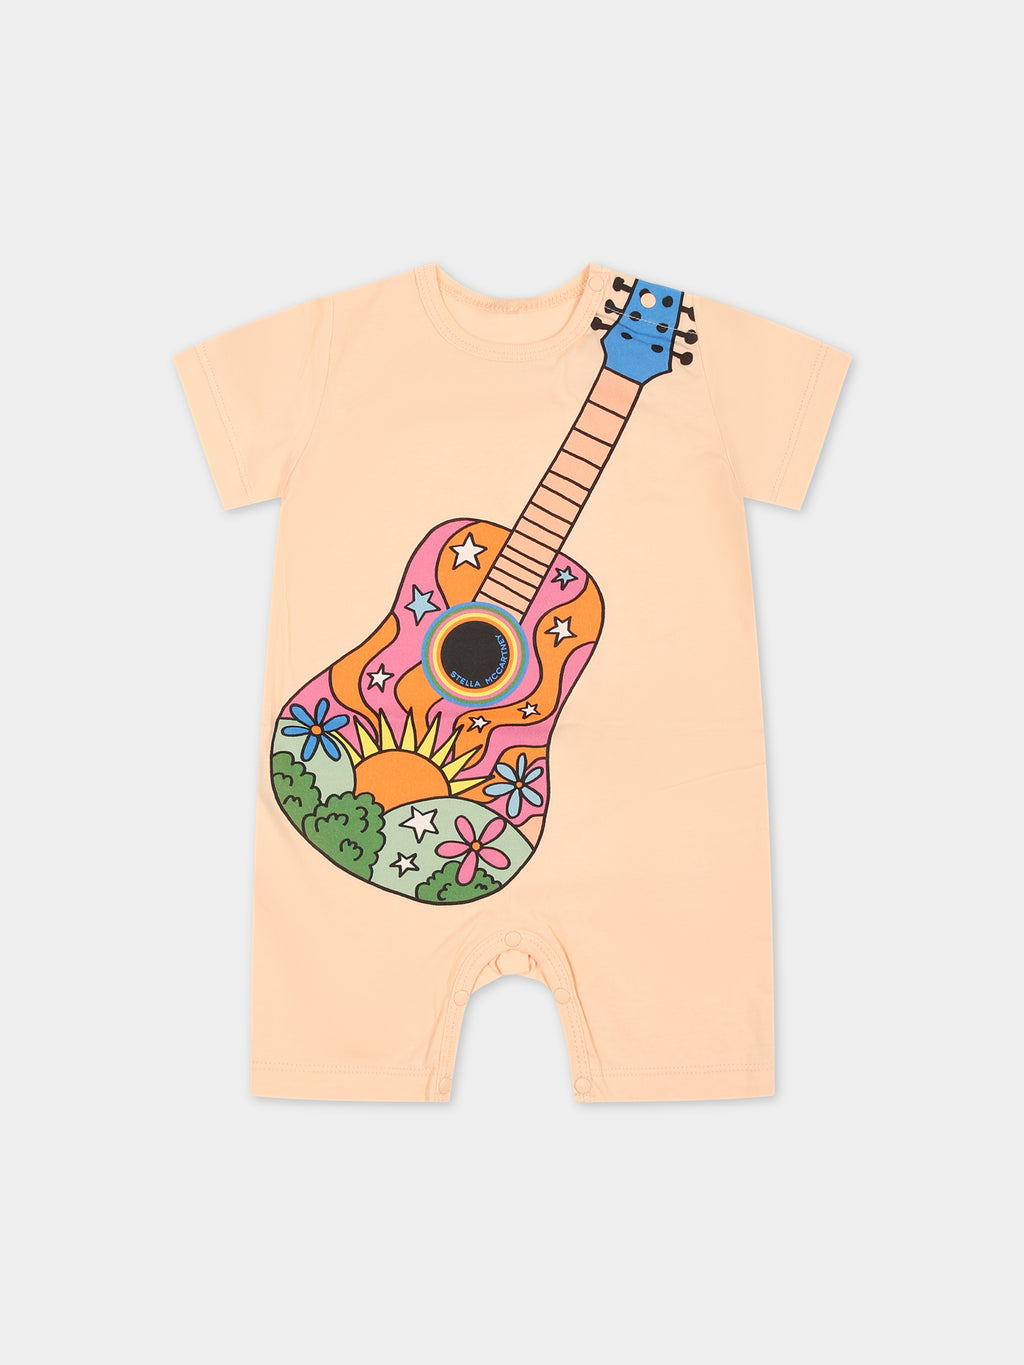 Pink romper for baby girl with guitar and logo